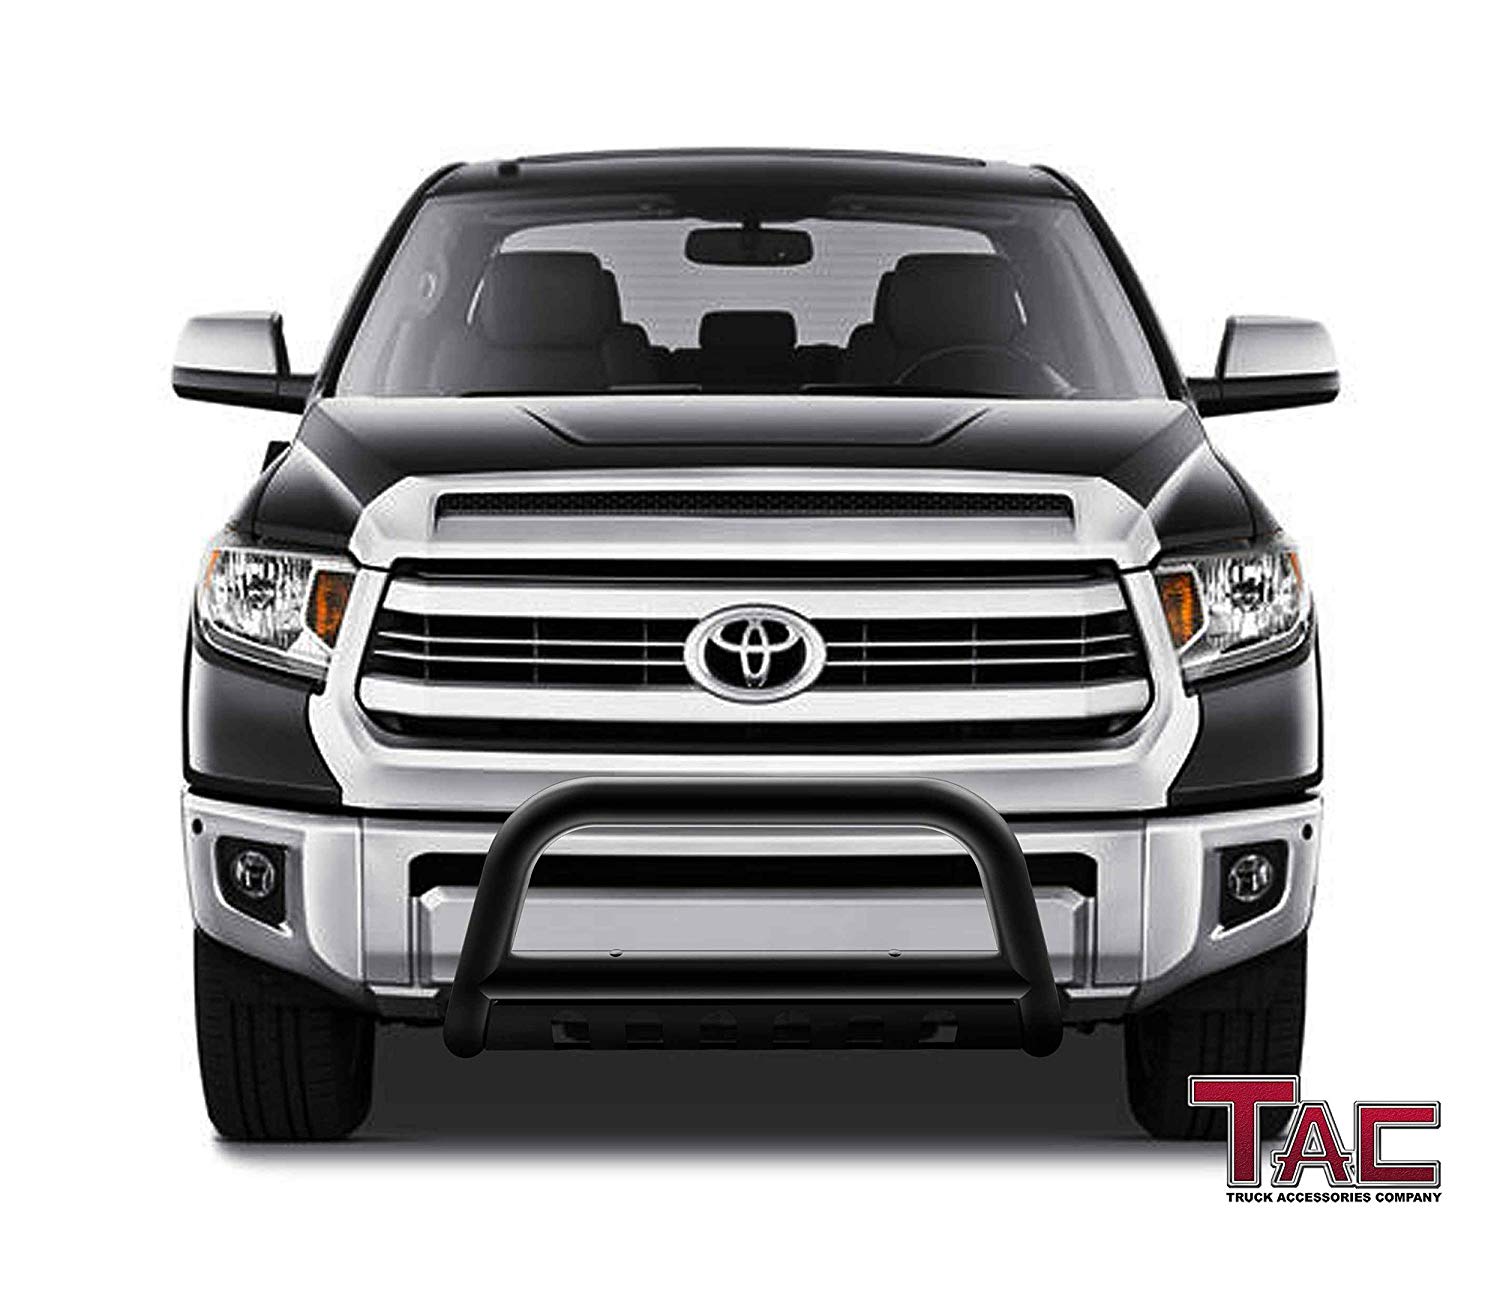 TAC Gloss Black 3" Bull Bar For 2007-2021 Toyota Tundra Truck / 2008-2022 Toyota Sequoia SUV Front Bumper Brush Grille Guard Nudge Bar - 0